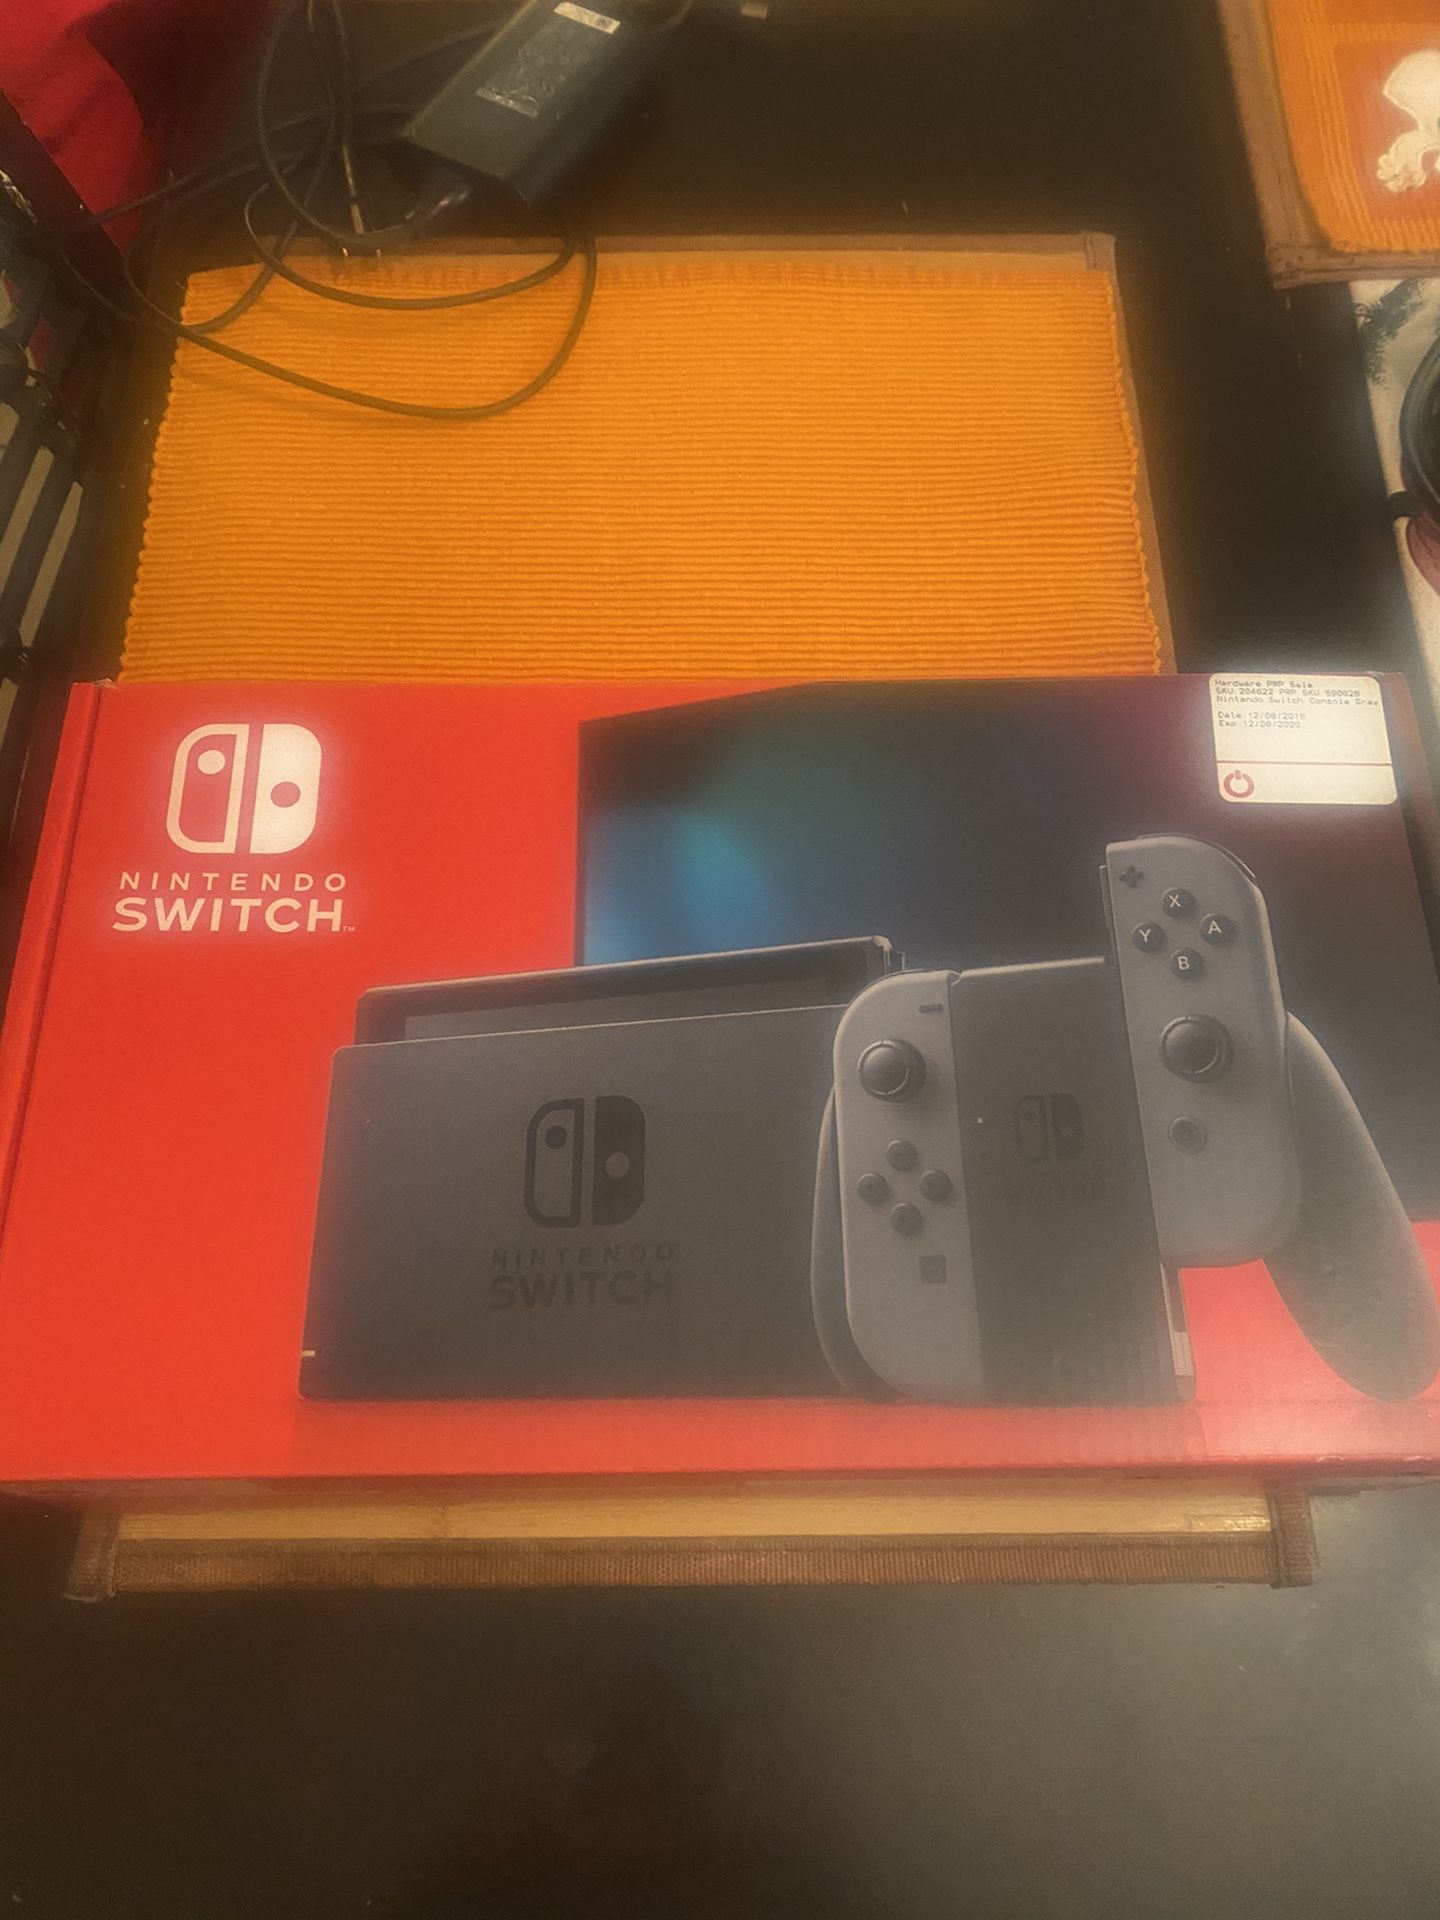 Nintendo Switch Game Console with TV adapter, Carrying Case, Screen Protector, & Super Smash Bros Game